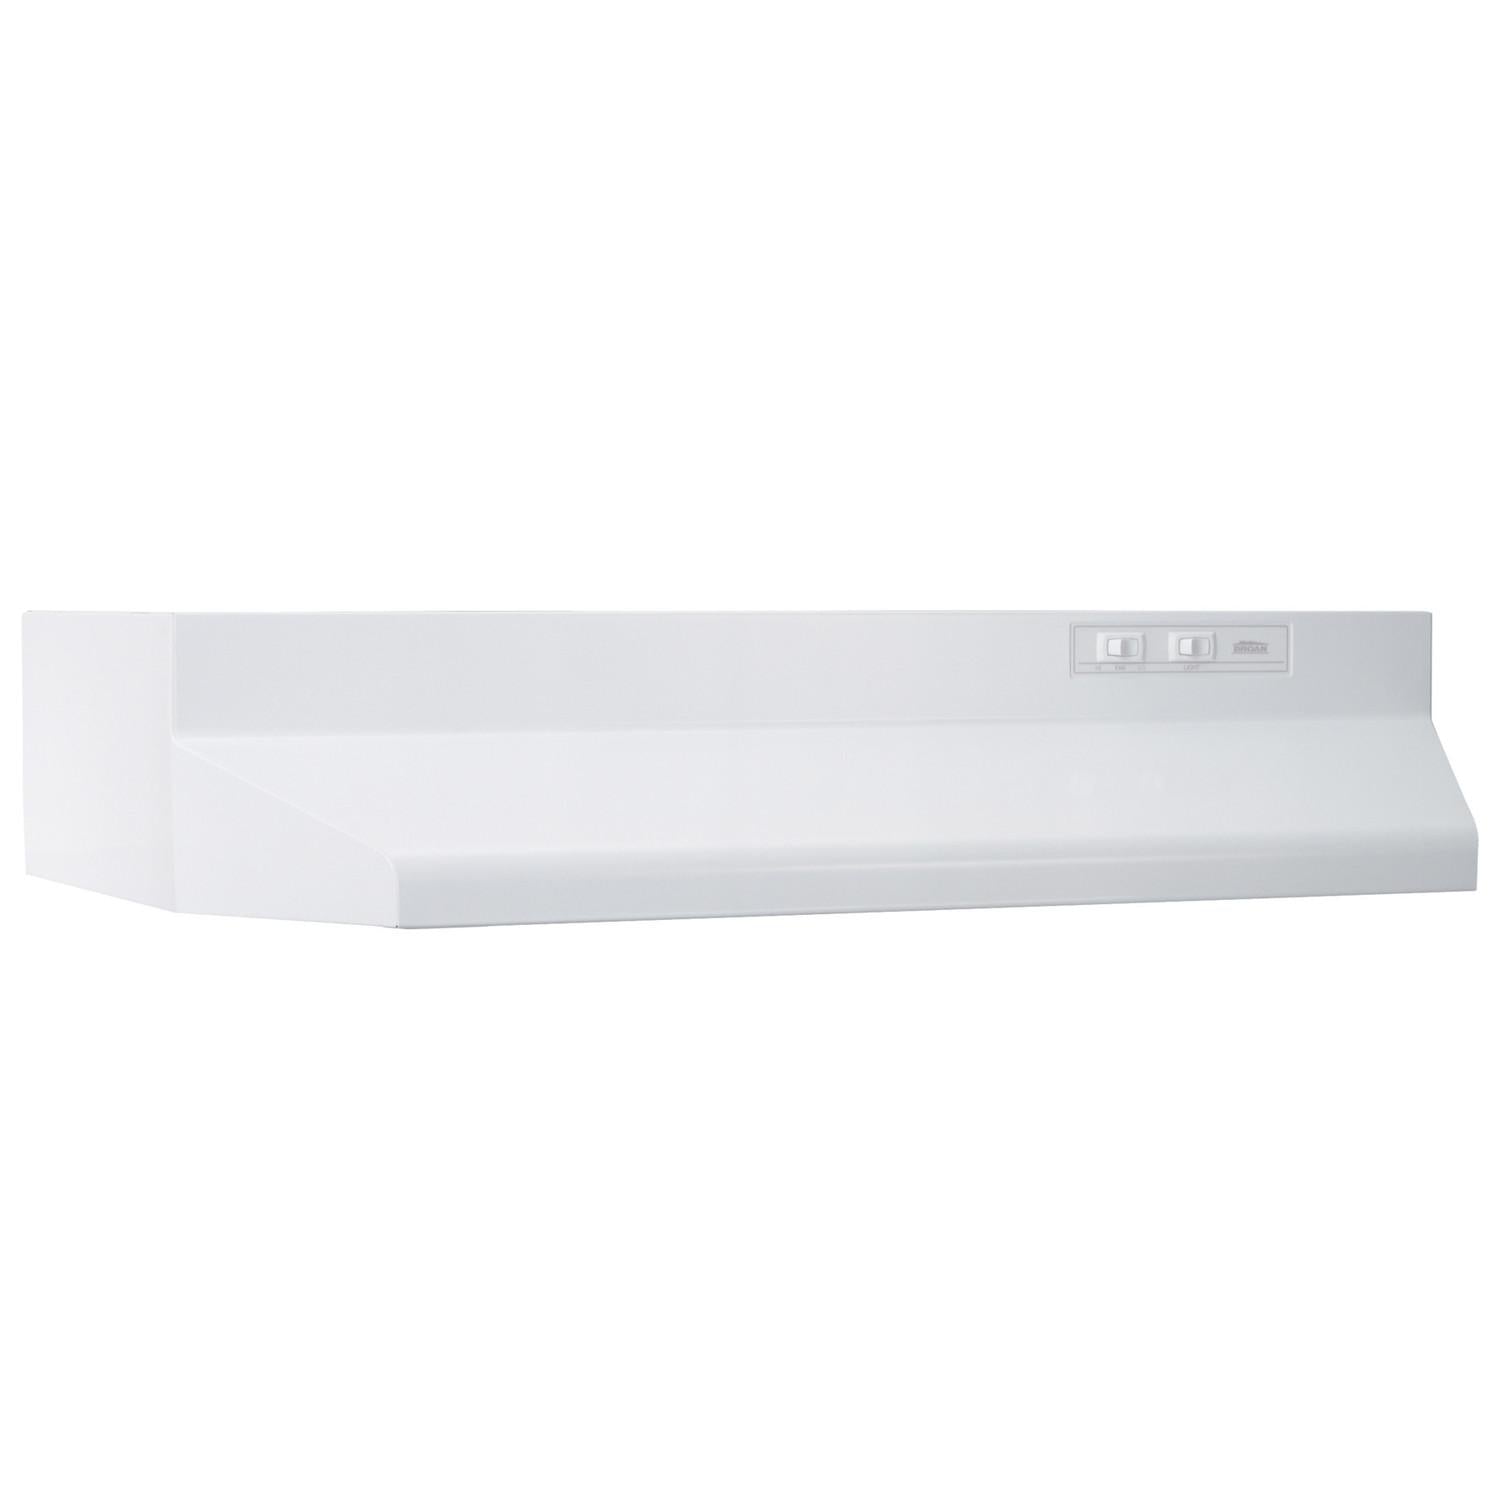 Broan® 30-Inch Ducted Under-Cabinet Range Hood w/ Easy Install System, 210 Max Blower CFM, White